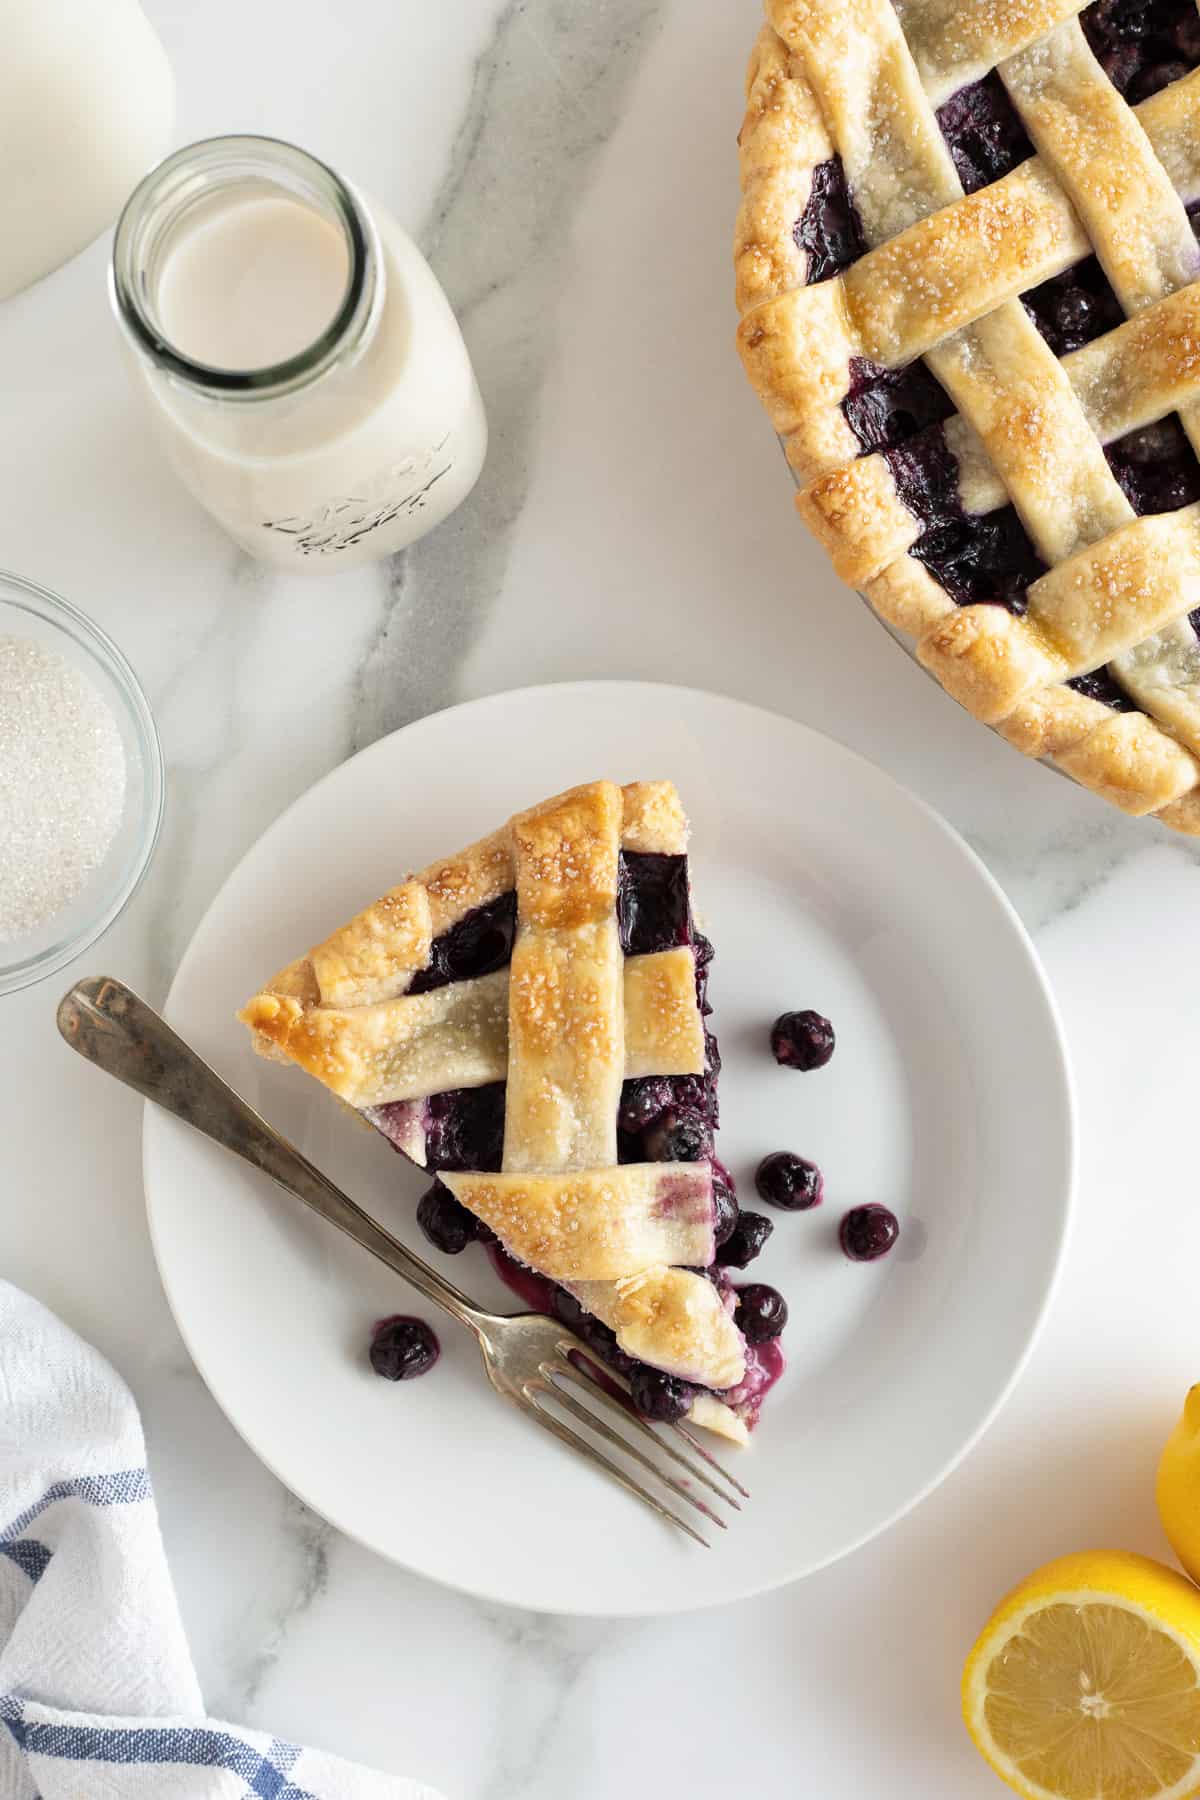 A top down shot of a slice of blueberry pie with lattice crust next to a pie dish.